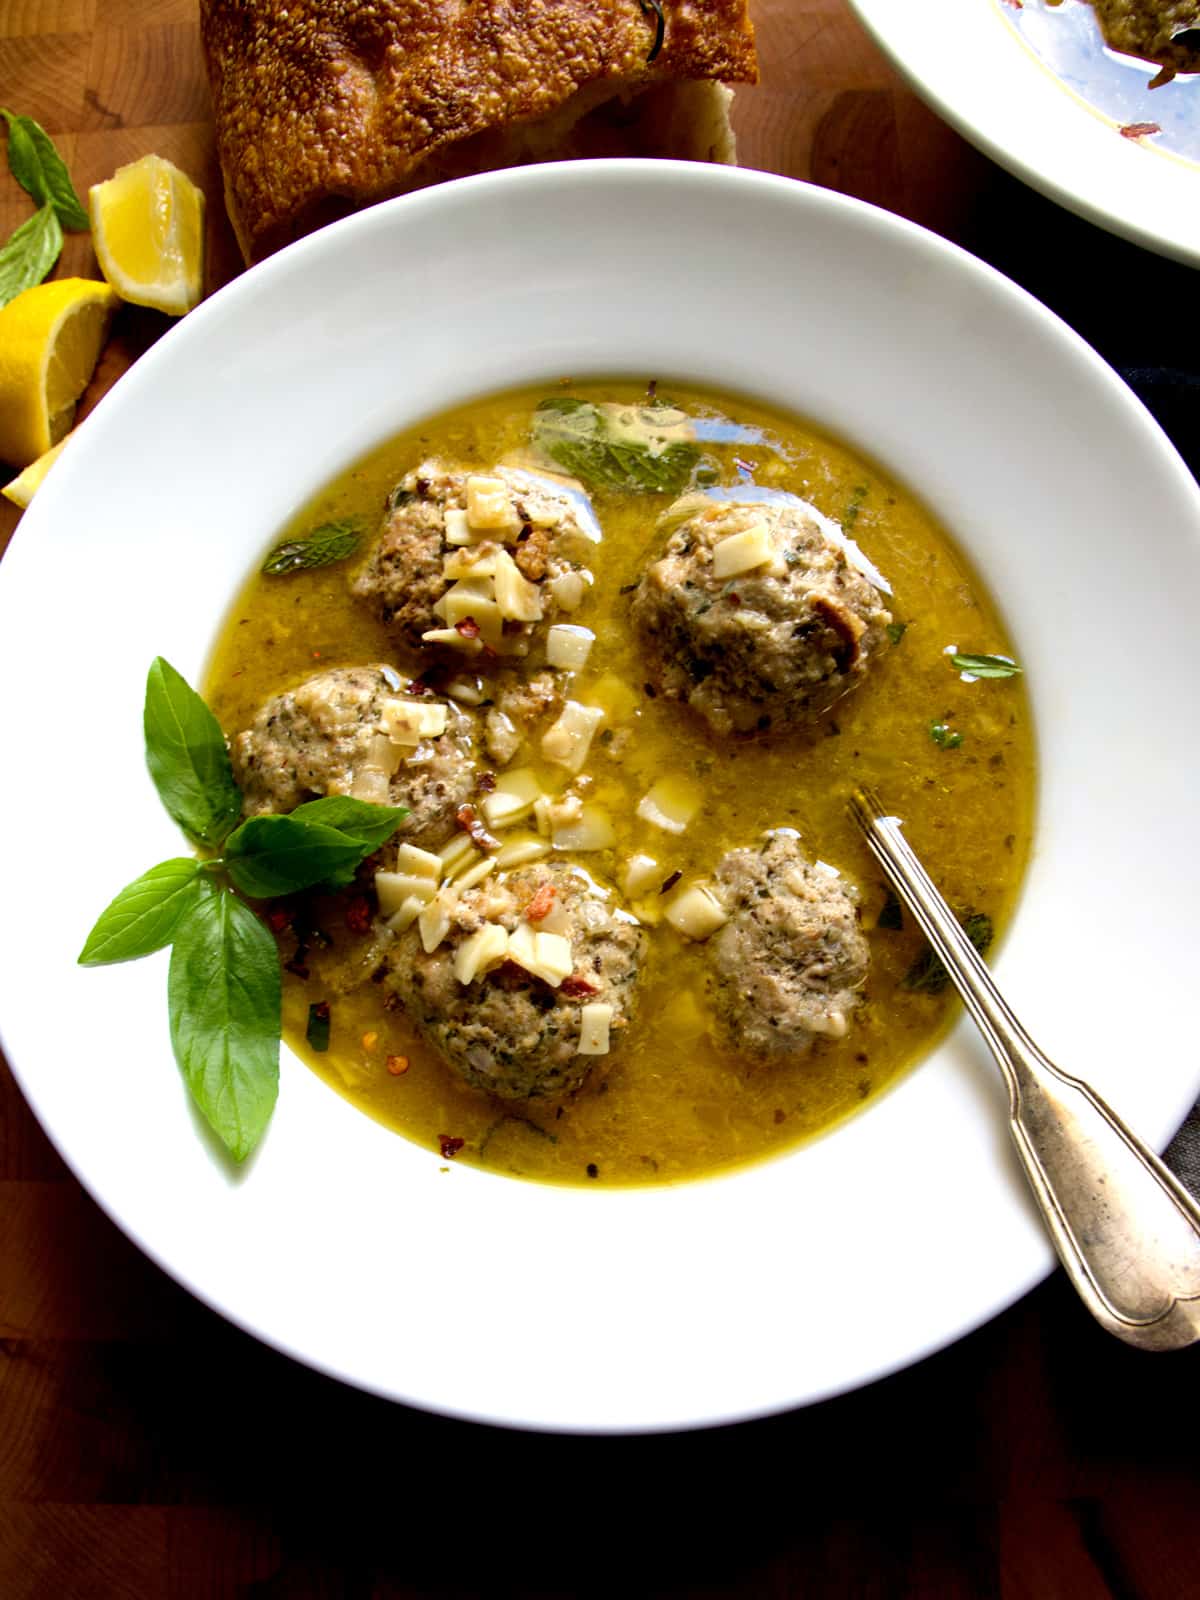 A bowl of meatball soup with some herbs and a spoon. Above it a loaf of bread and some lemon wedges.